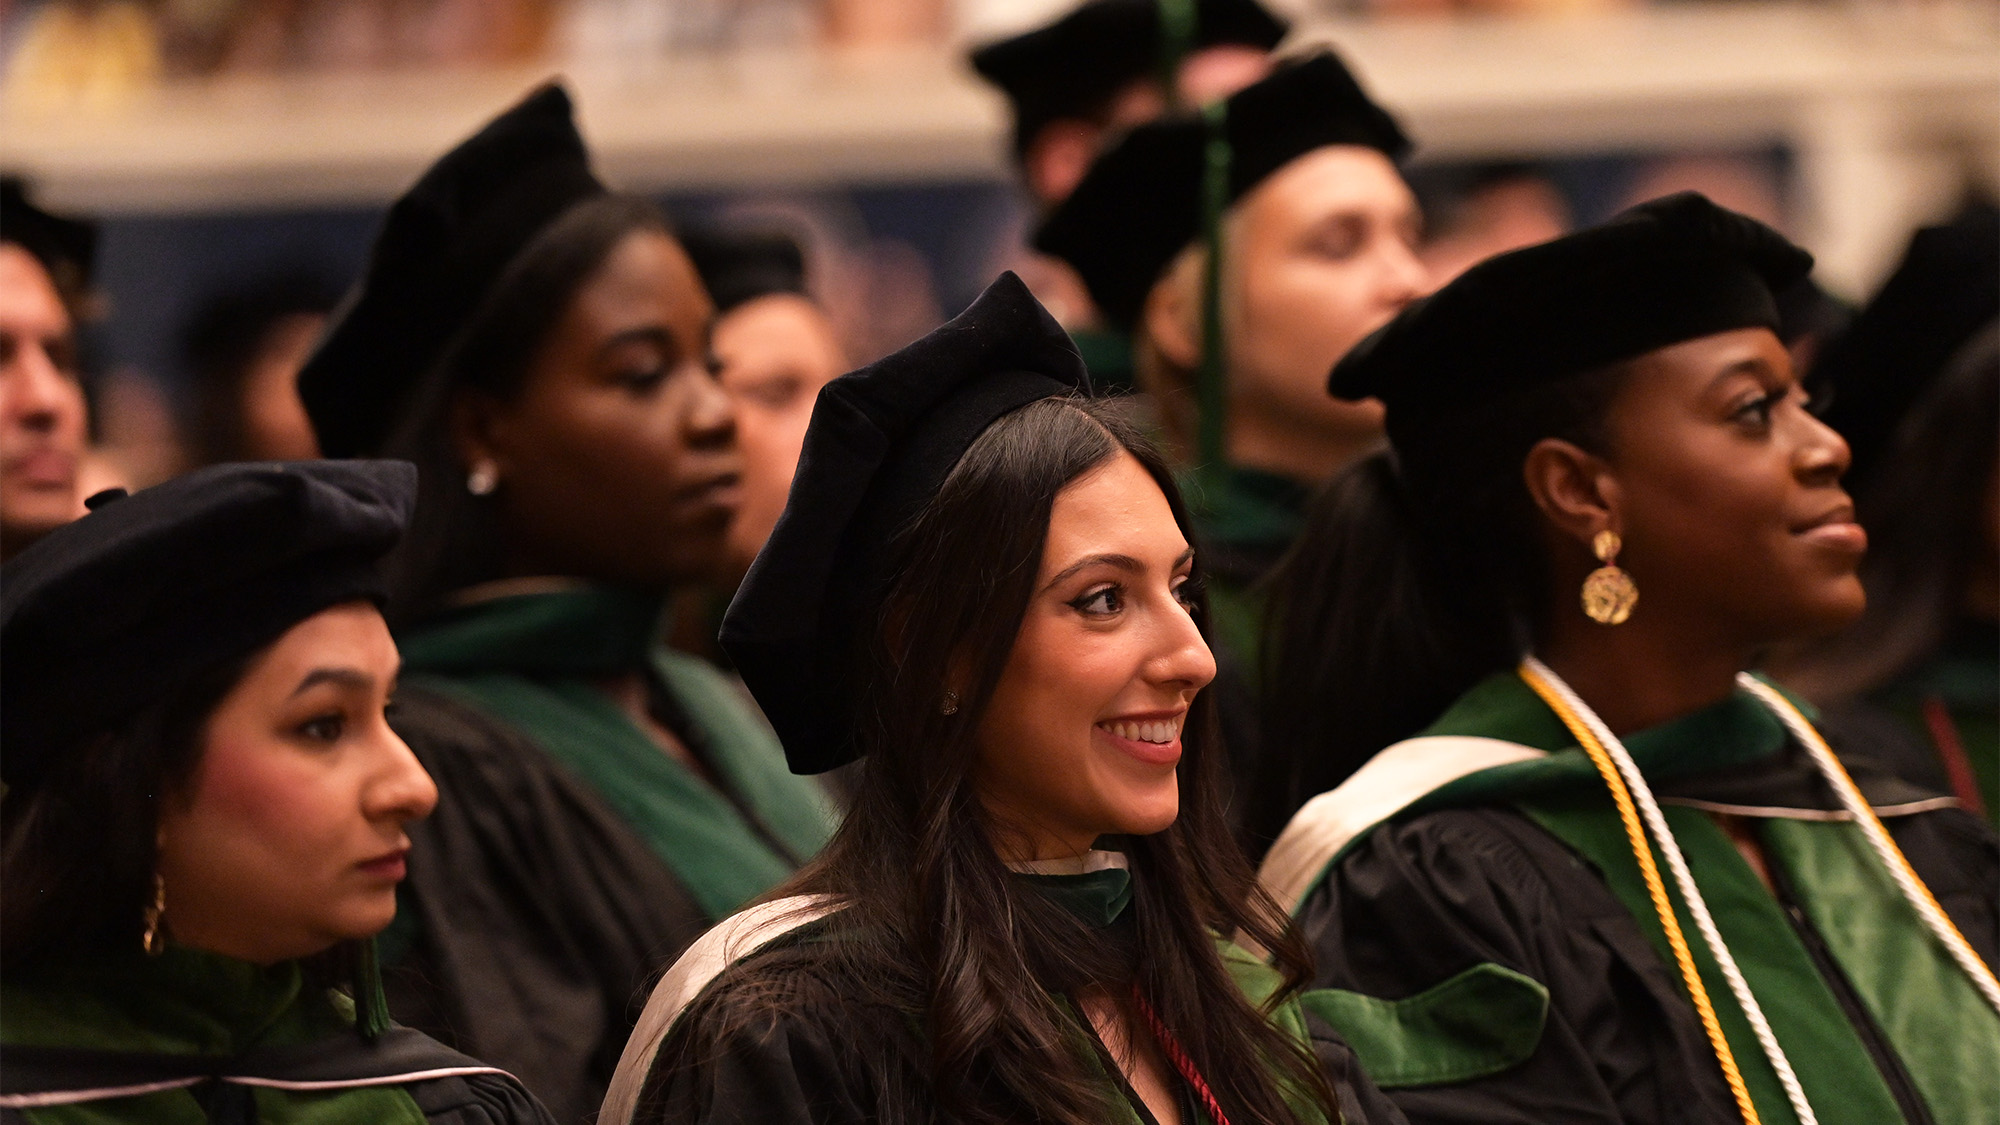 School of Medicine students sit in their commencement garb